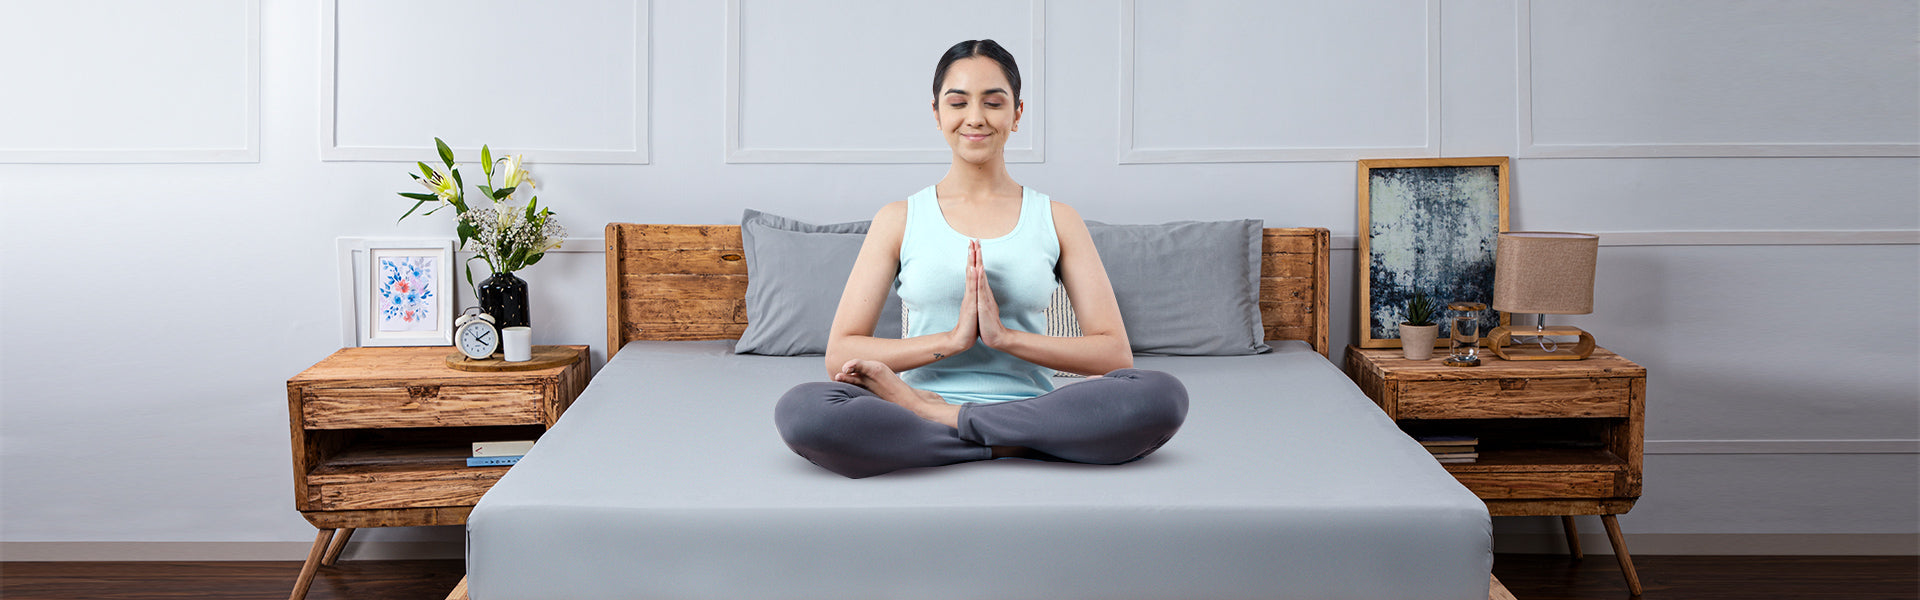 Yoga for Better Sleep: All You Need to Know